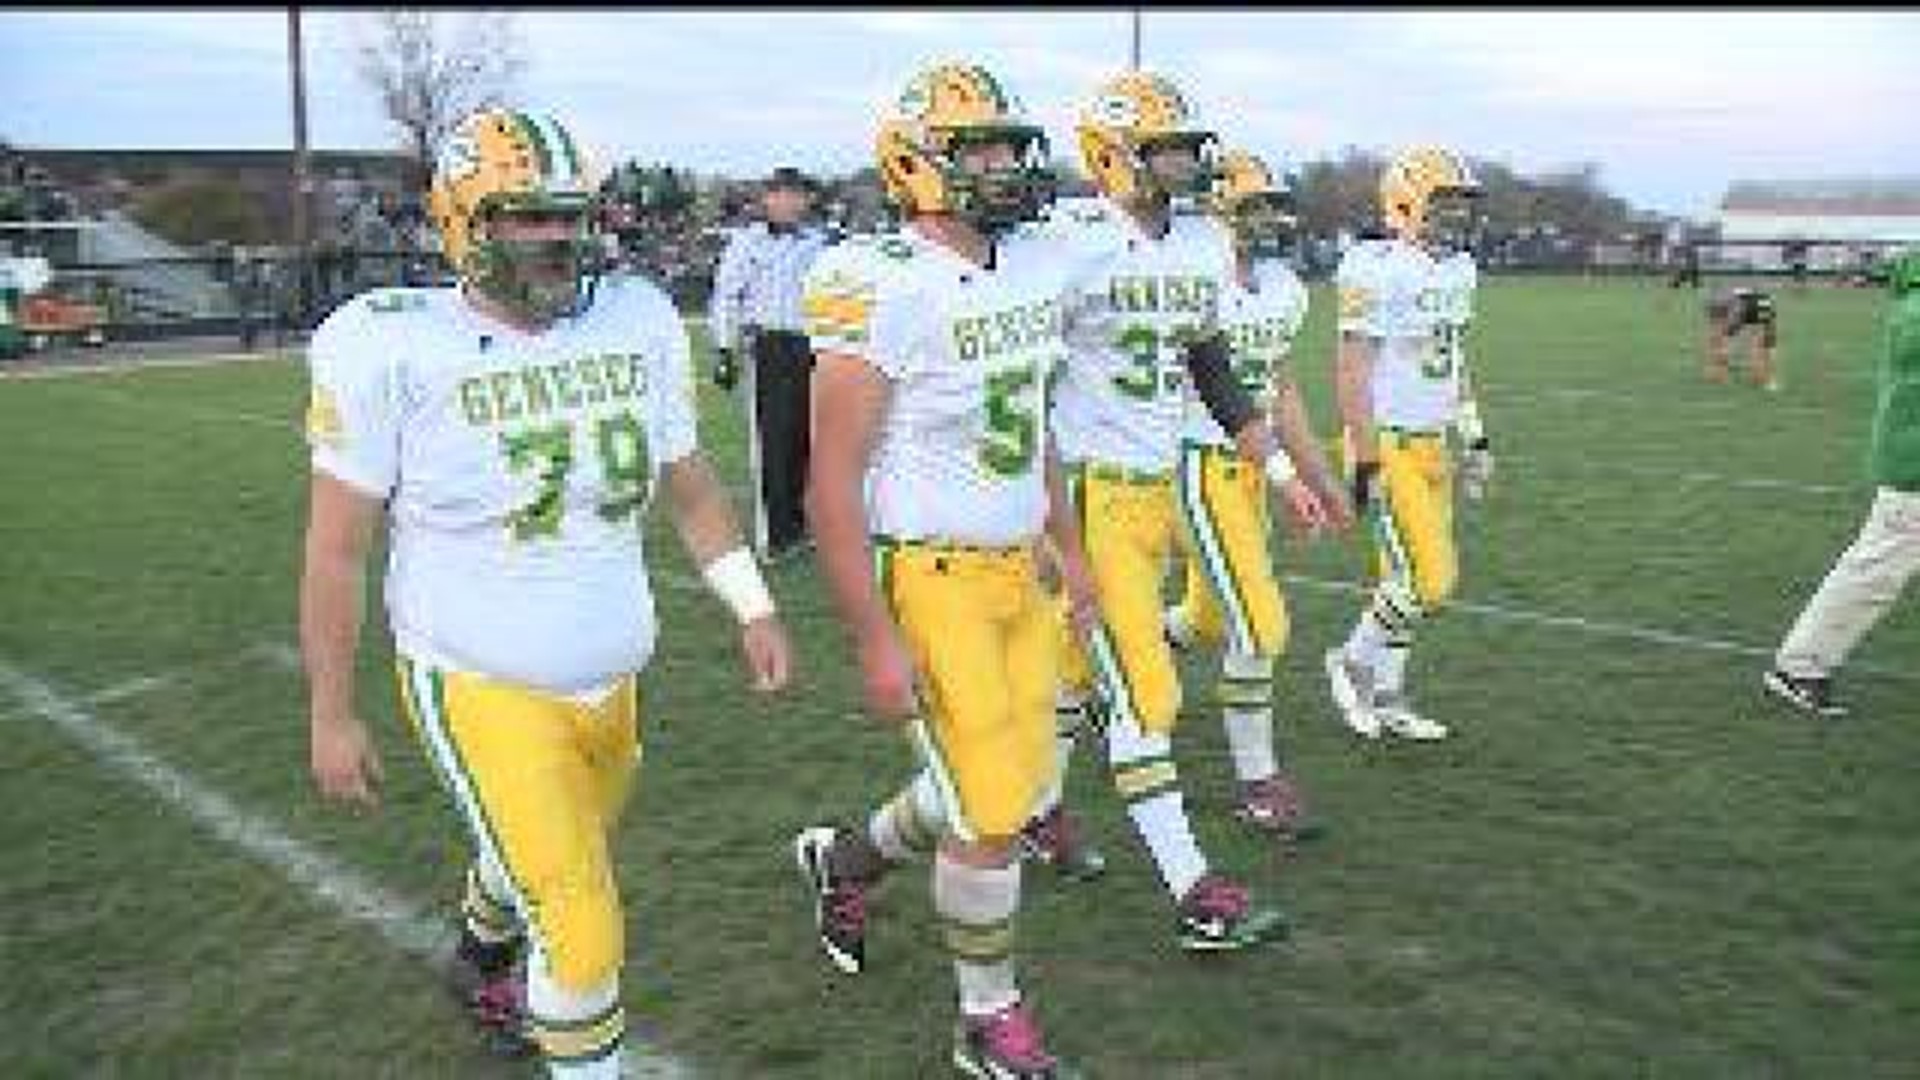 Geneseo Set for 2nd Round of Playoffs